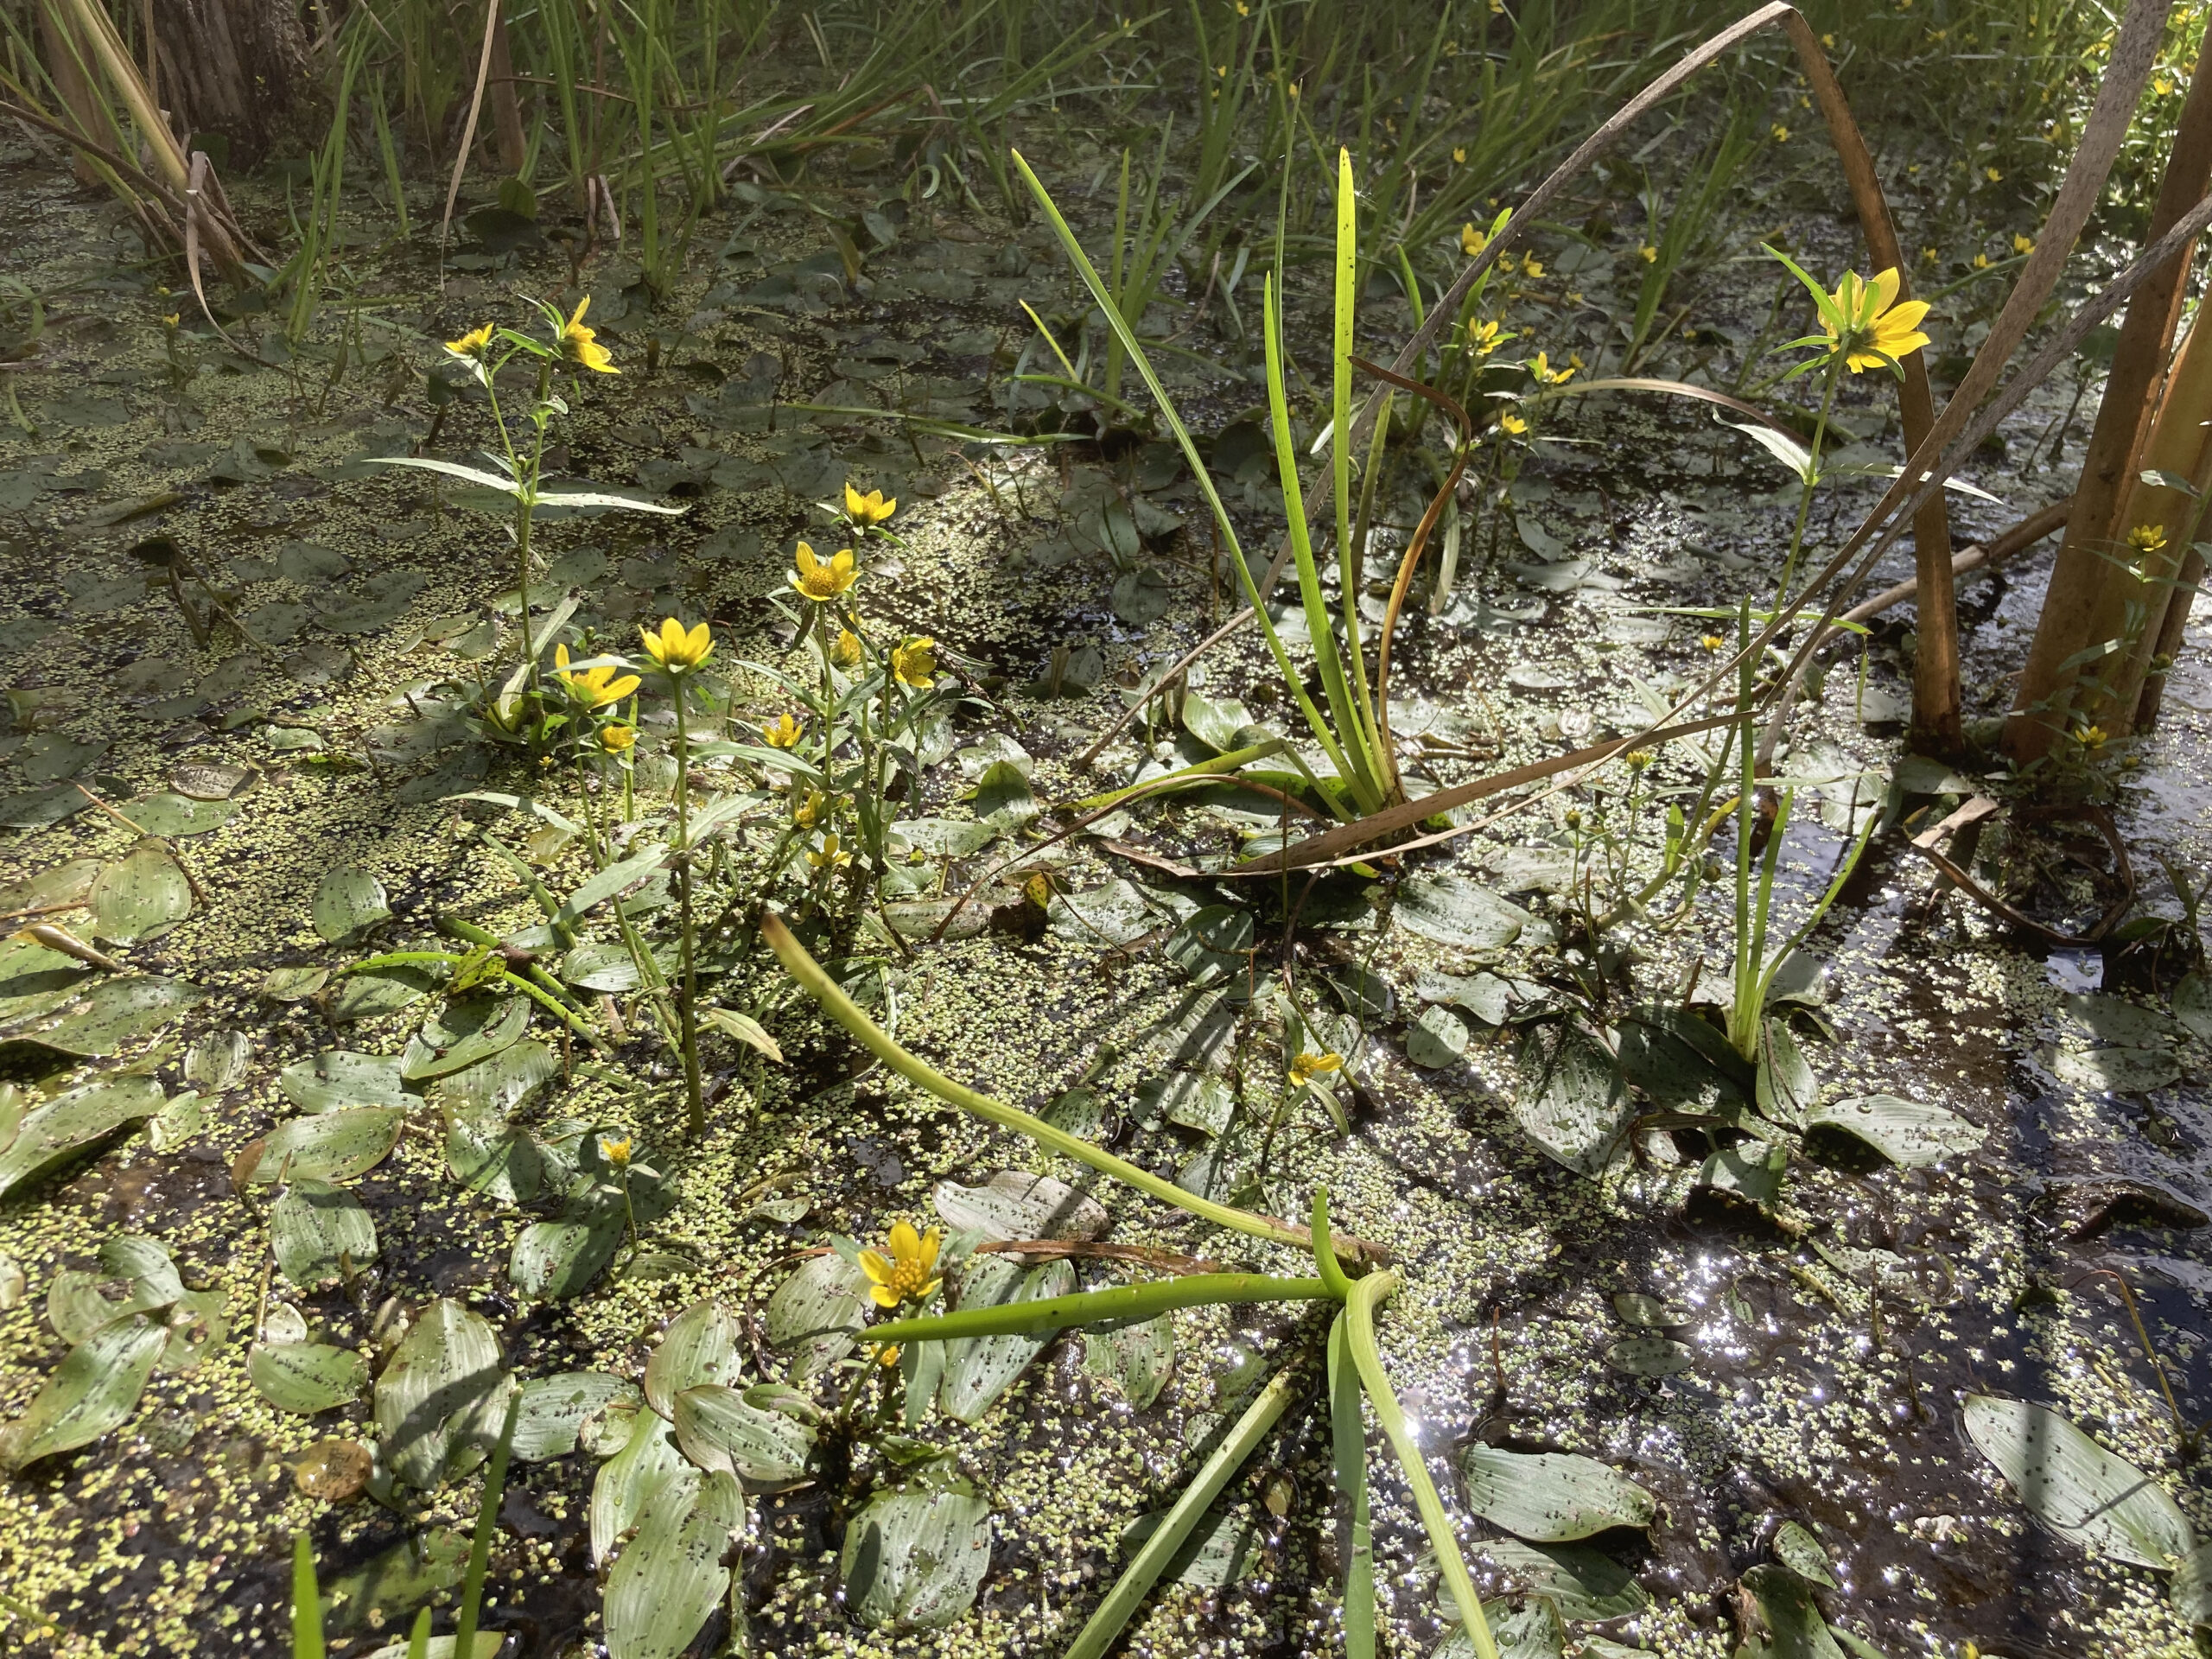 A view of sedges with yellow flowers and other aquatic/floating vegetation in the wetland site.